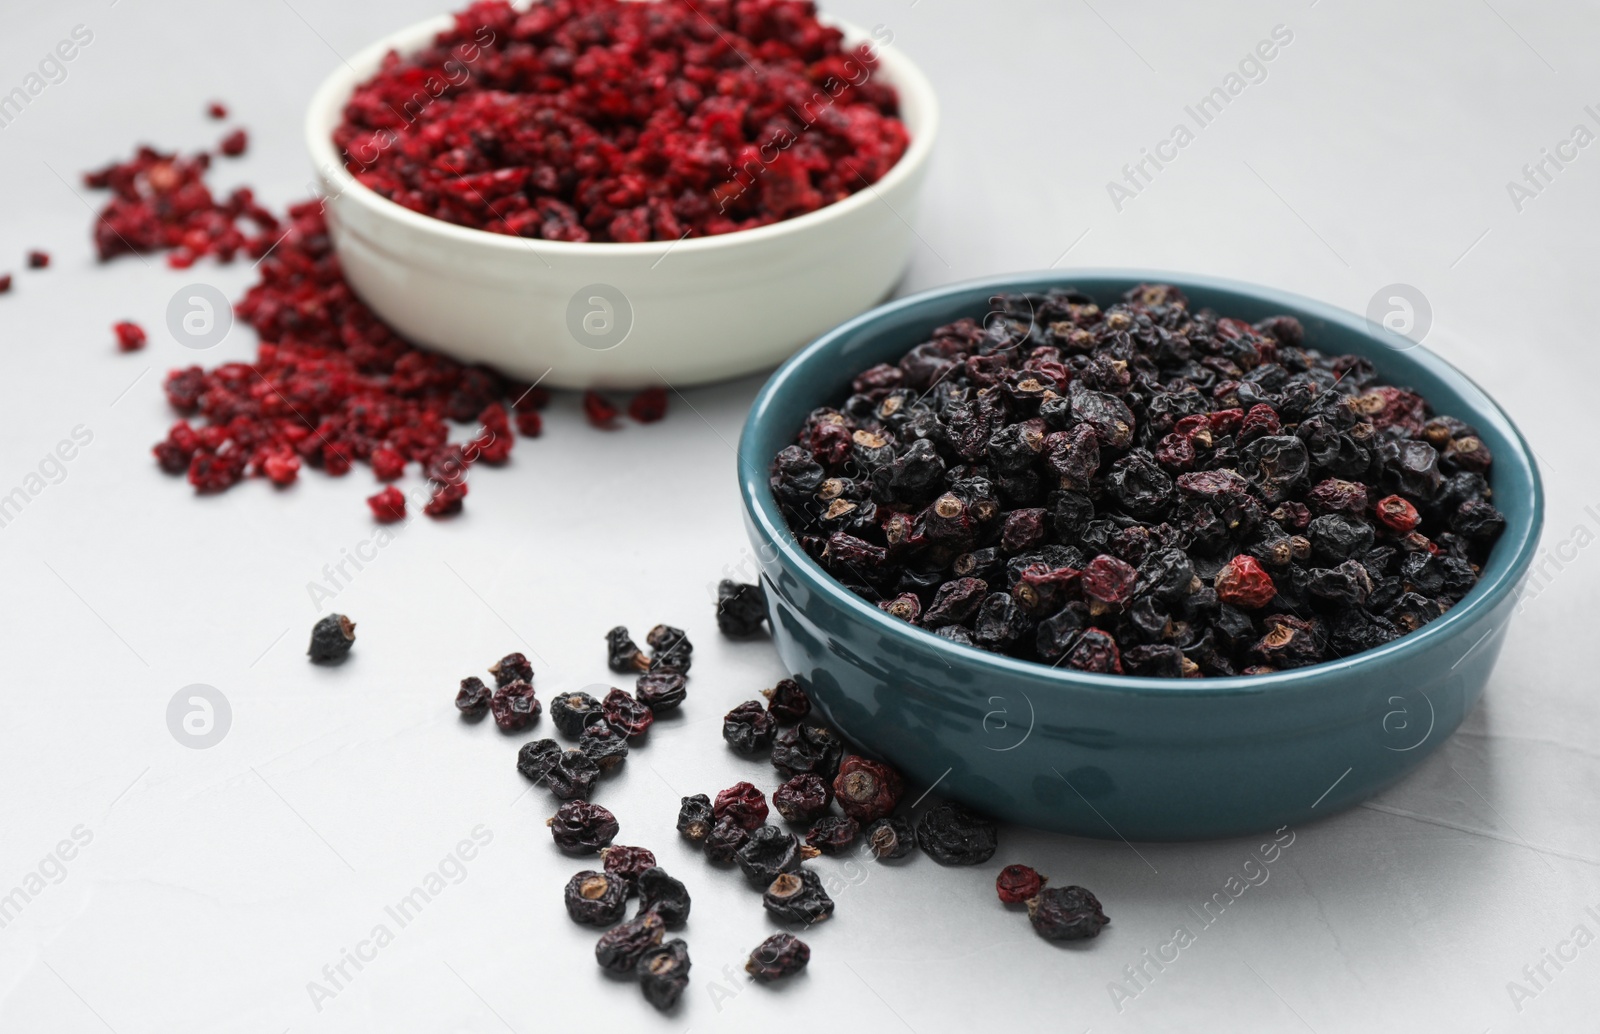 Photo of Dried black and red currant berries on light table